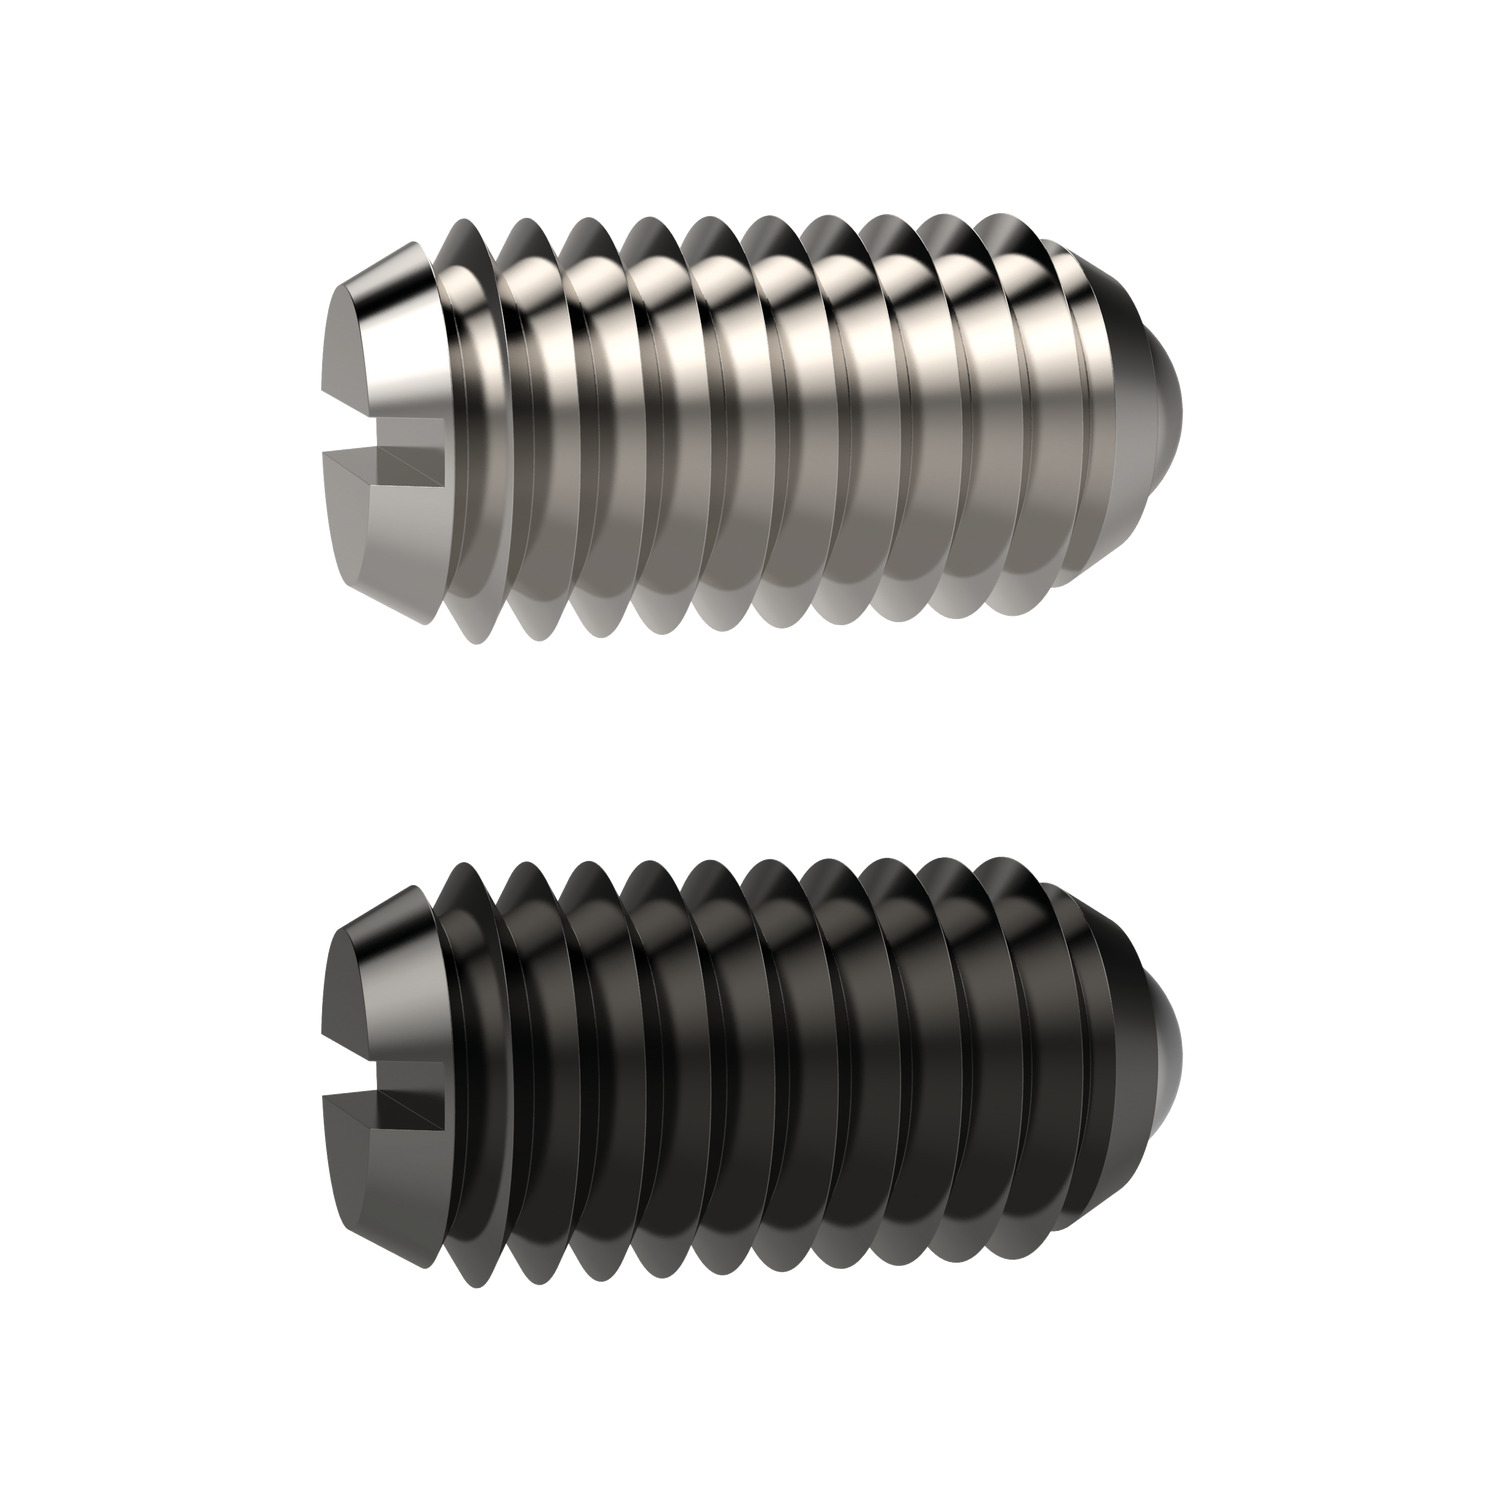 Spring Plungers A ball end and slot spring plunger available in steel and stainless steel with sizes starting from M2 up to M24. Increased spring strength variations provided within the standard range.